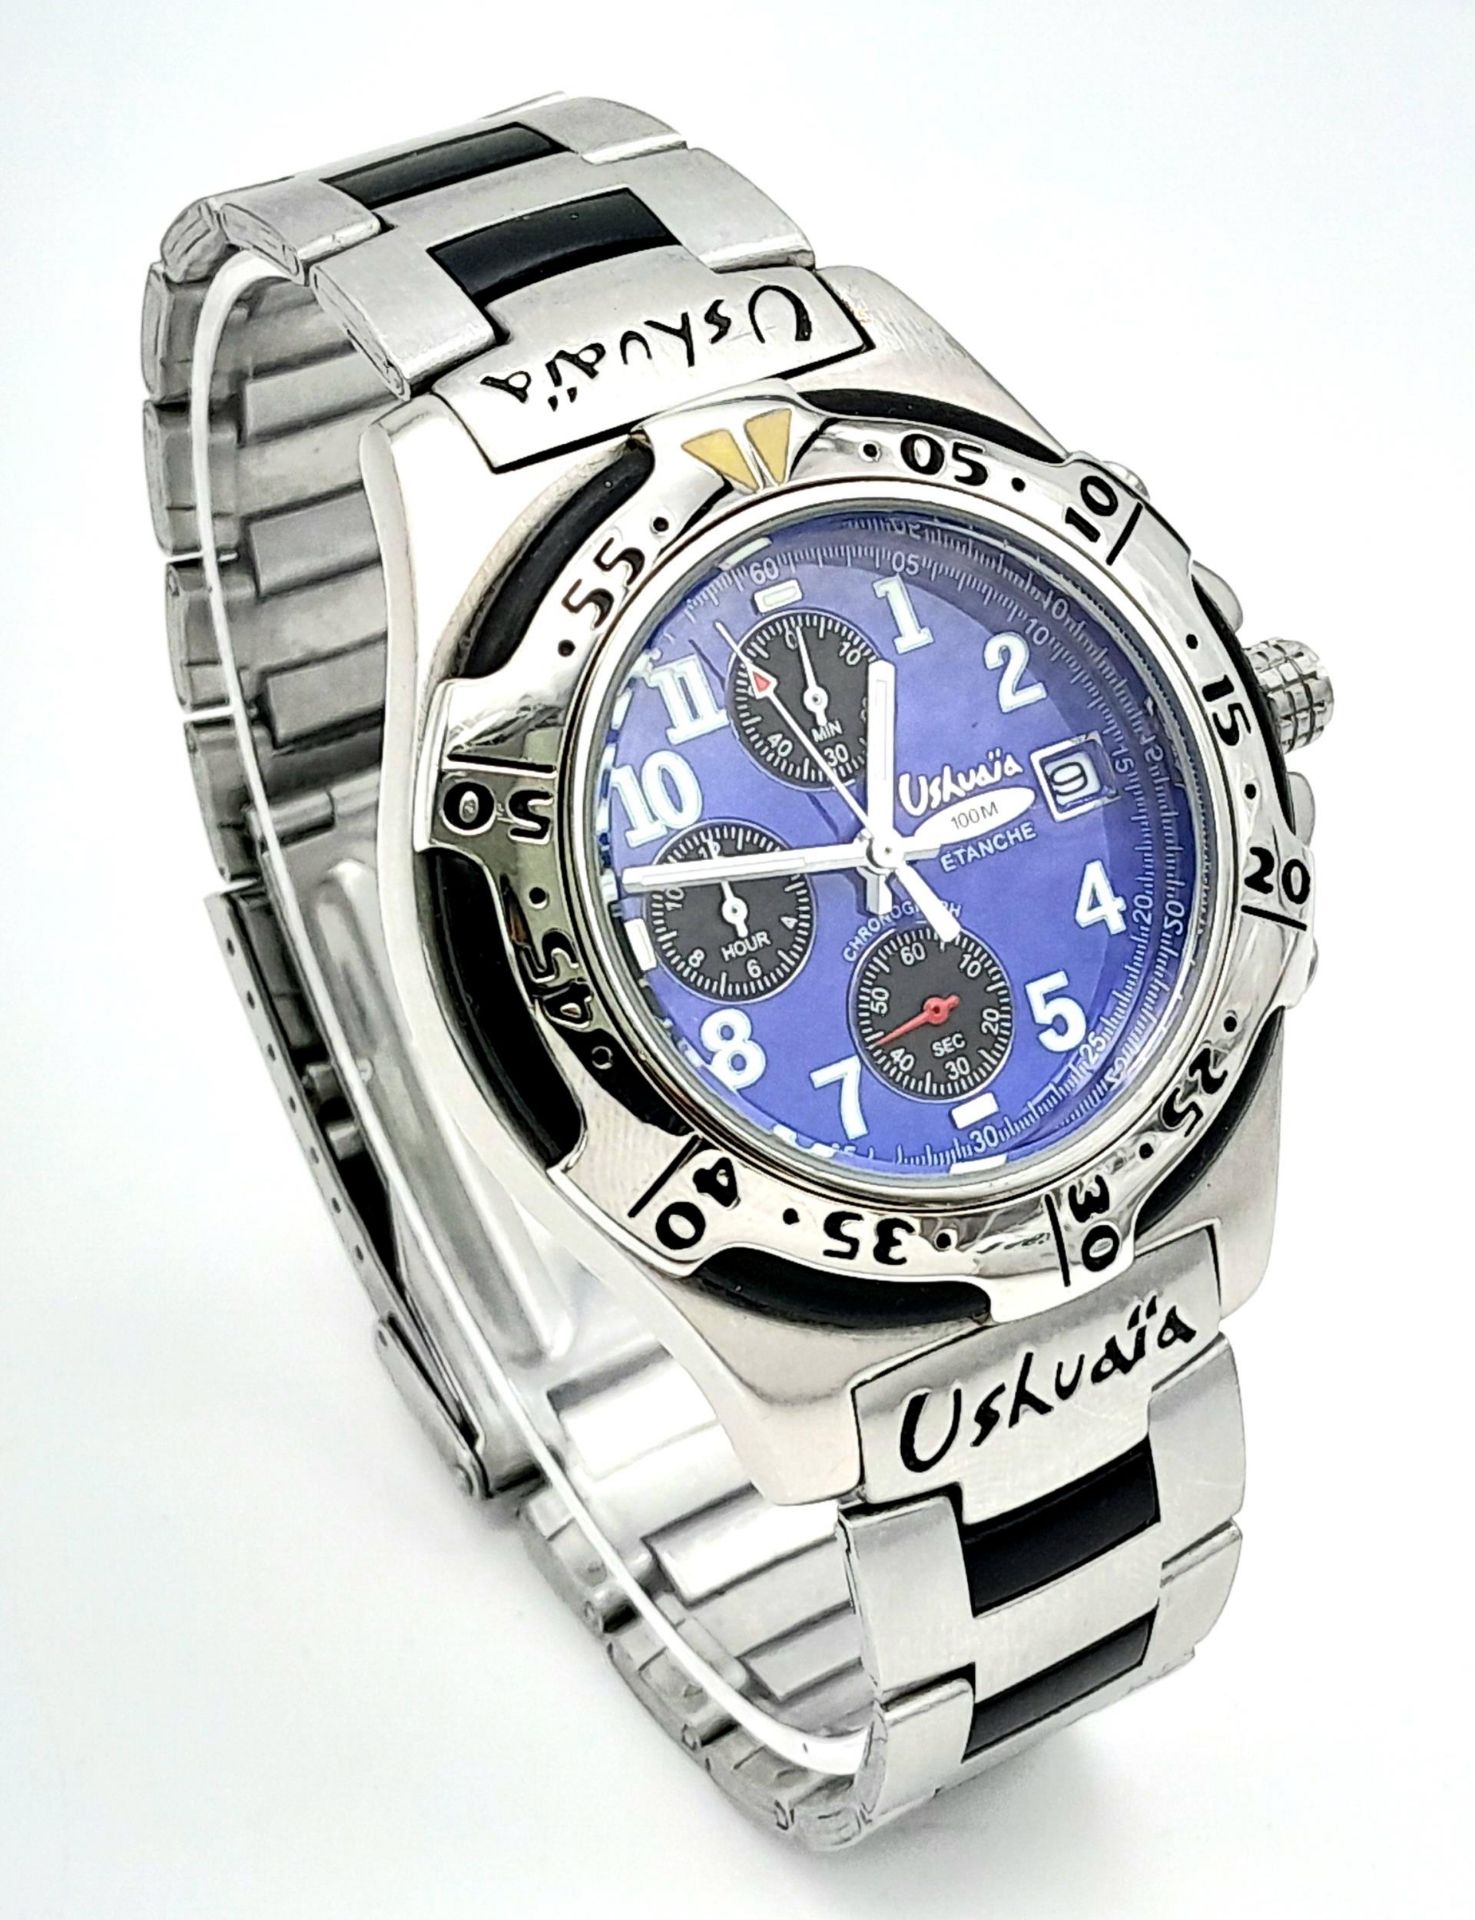 A Scarce in the UK, Argentinian Men’s Stainless Steel Chronograph Date Watch by Ushuaia. 44mm - Image 3 of 6